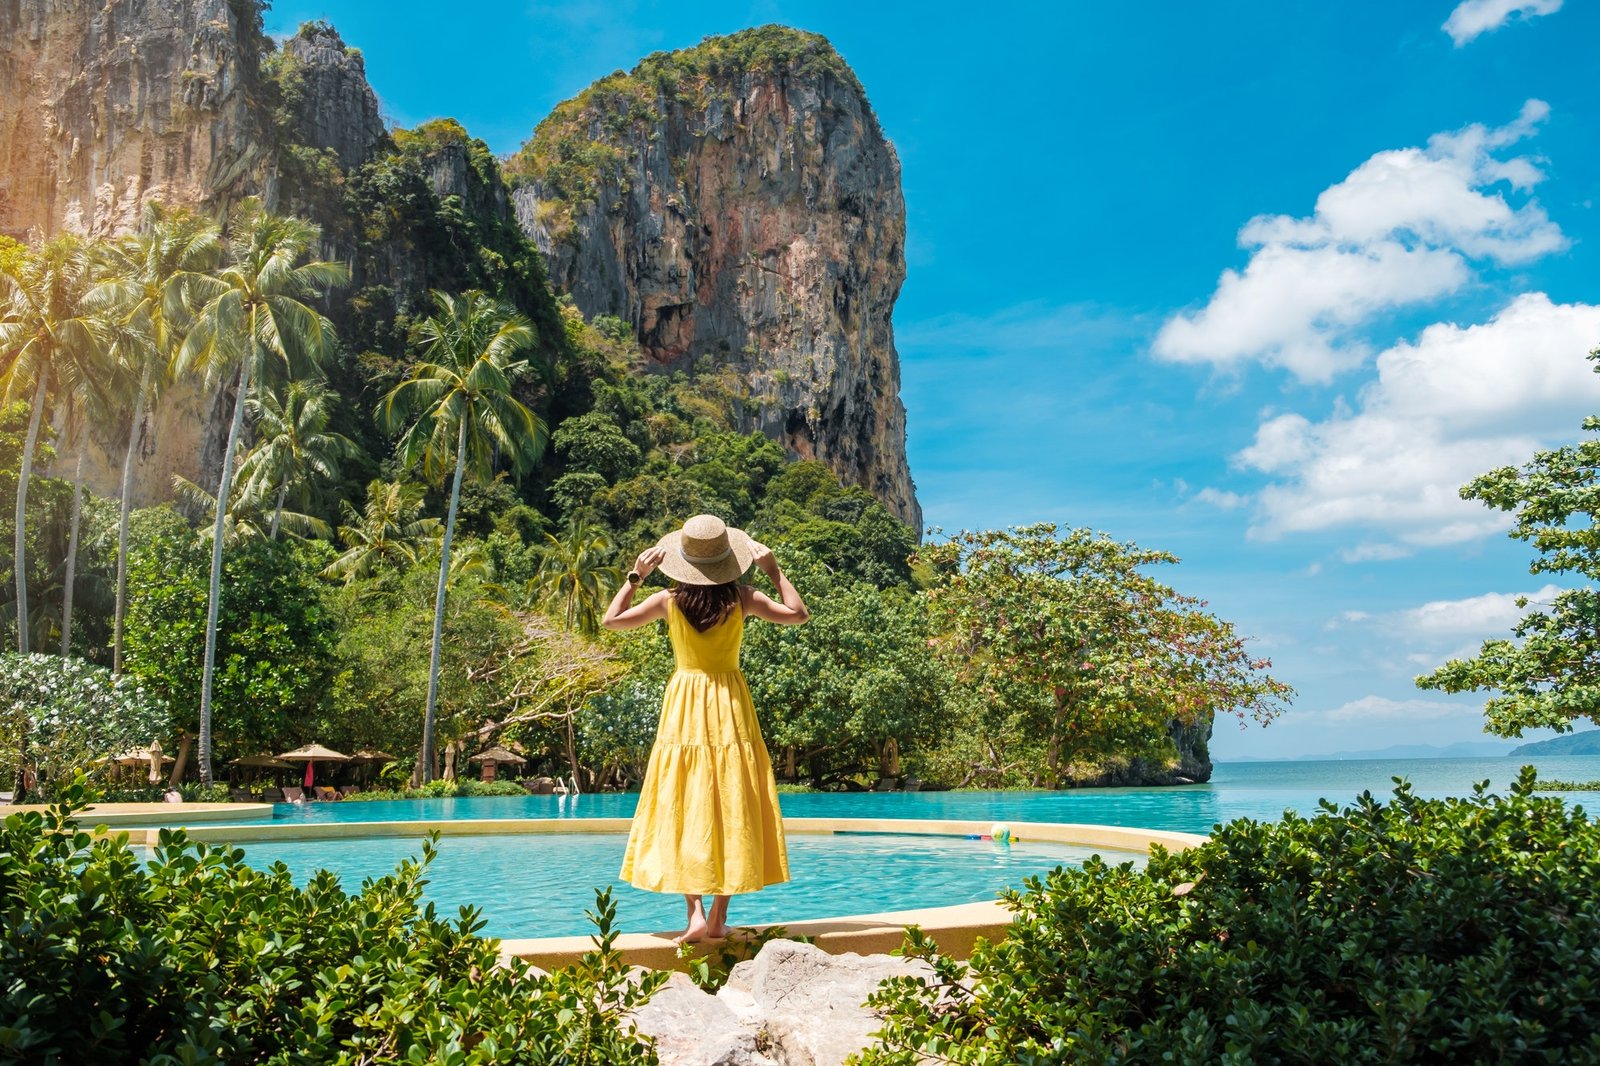 woman-tourist-in-yellow-dress-and-hat-traveling-on-railay-beach-krabi-thailand-vacation-travel.jpg